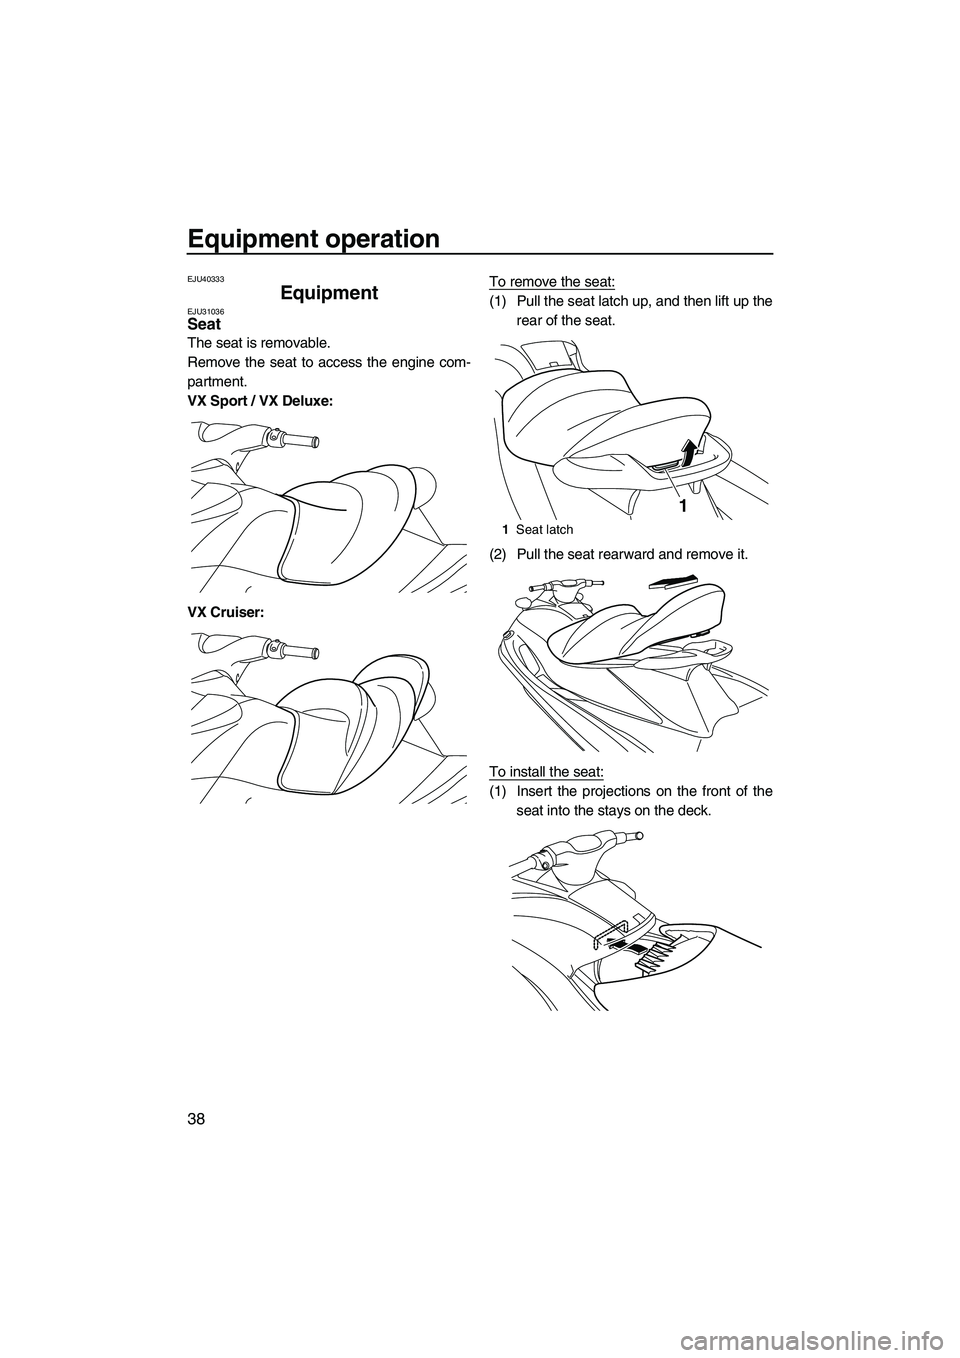 YAMAHA VX SPORT 2013 Service Manual Equipment operation
38
EJU40333
Equipment EJU31036Seat 
The seat is removable.
Remove the seat to access the engine com-
partment.
VX Sport / VX Deluxe:
VX Cruiser:To remove the seat:
(1) Pull the sea